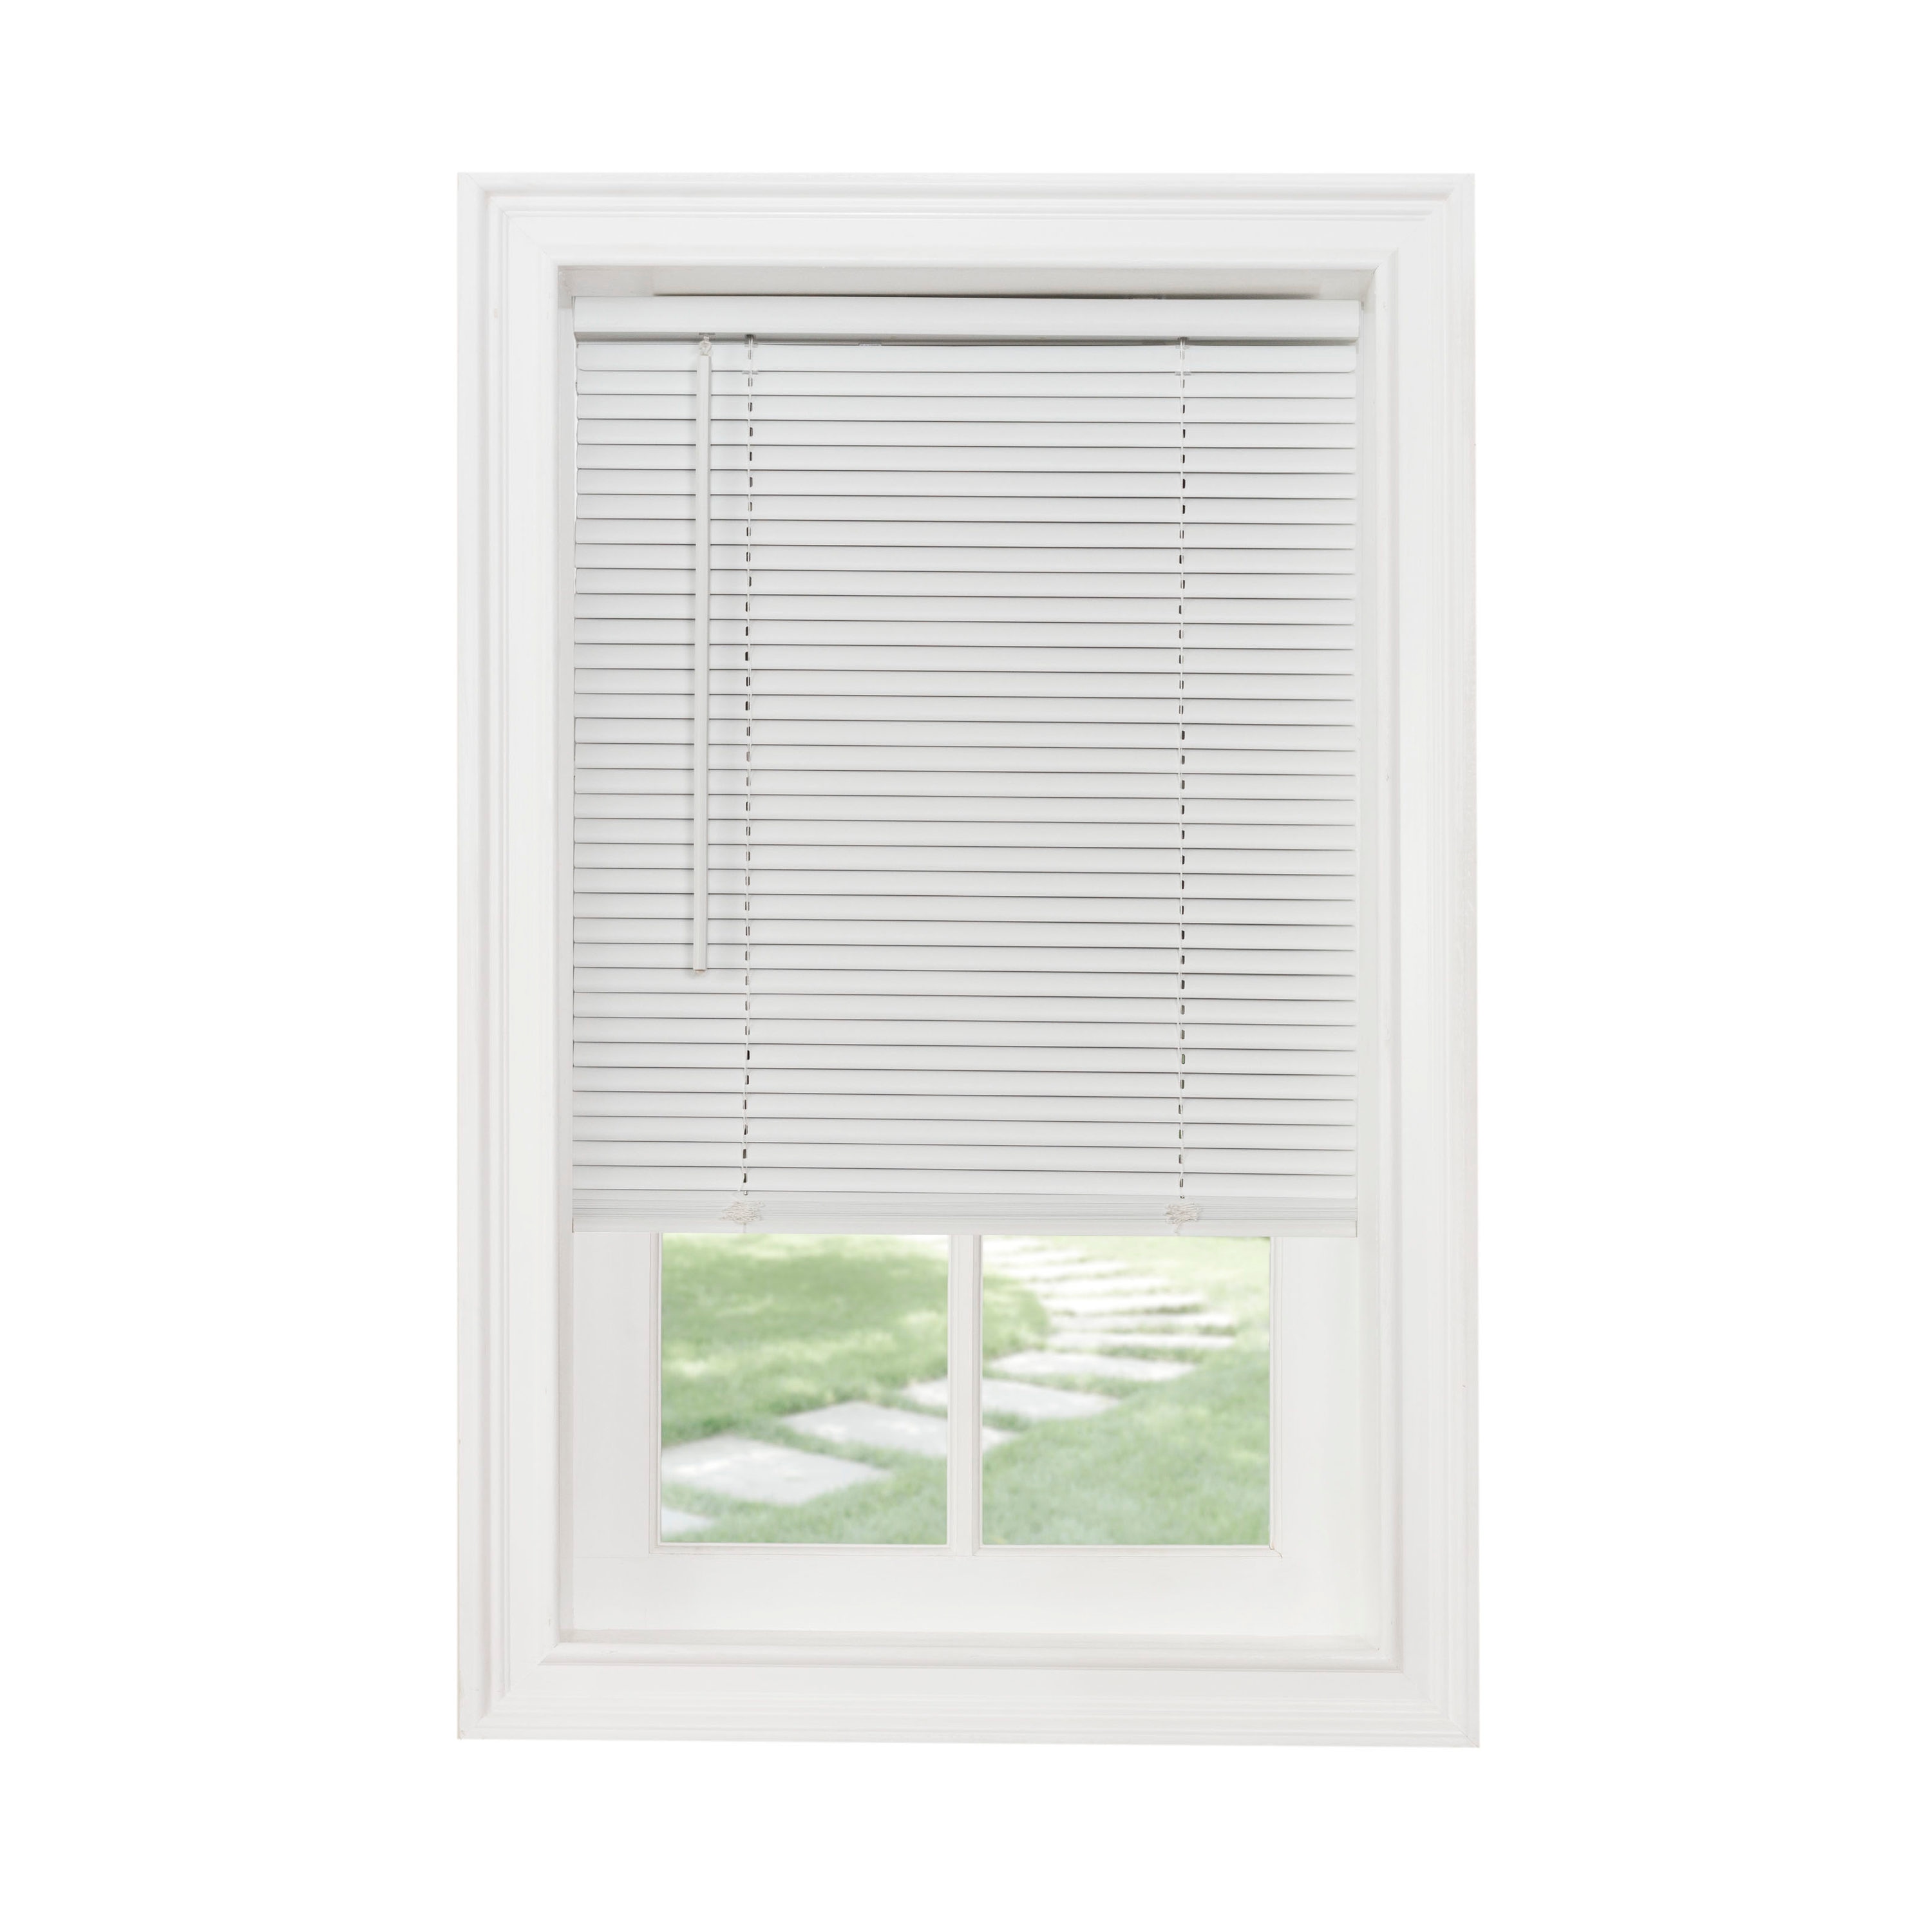 1" Vinyl Mini Blinds Alabaster Various Width all 36" Long- FREE SHIPPING 